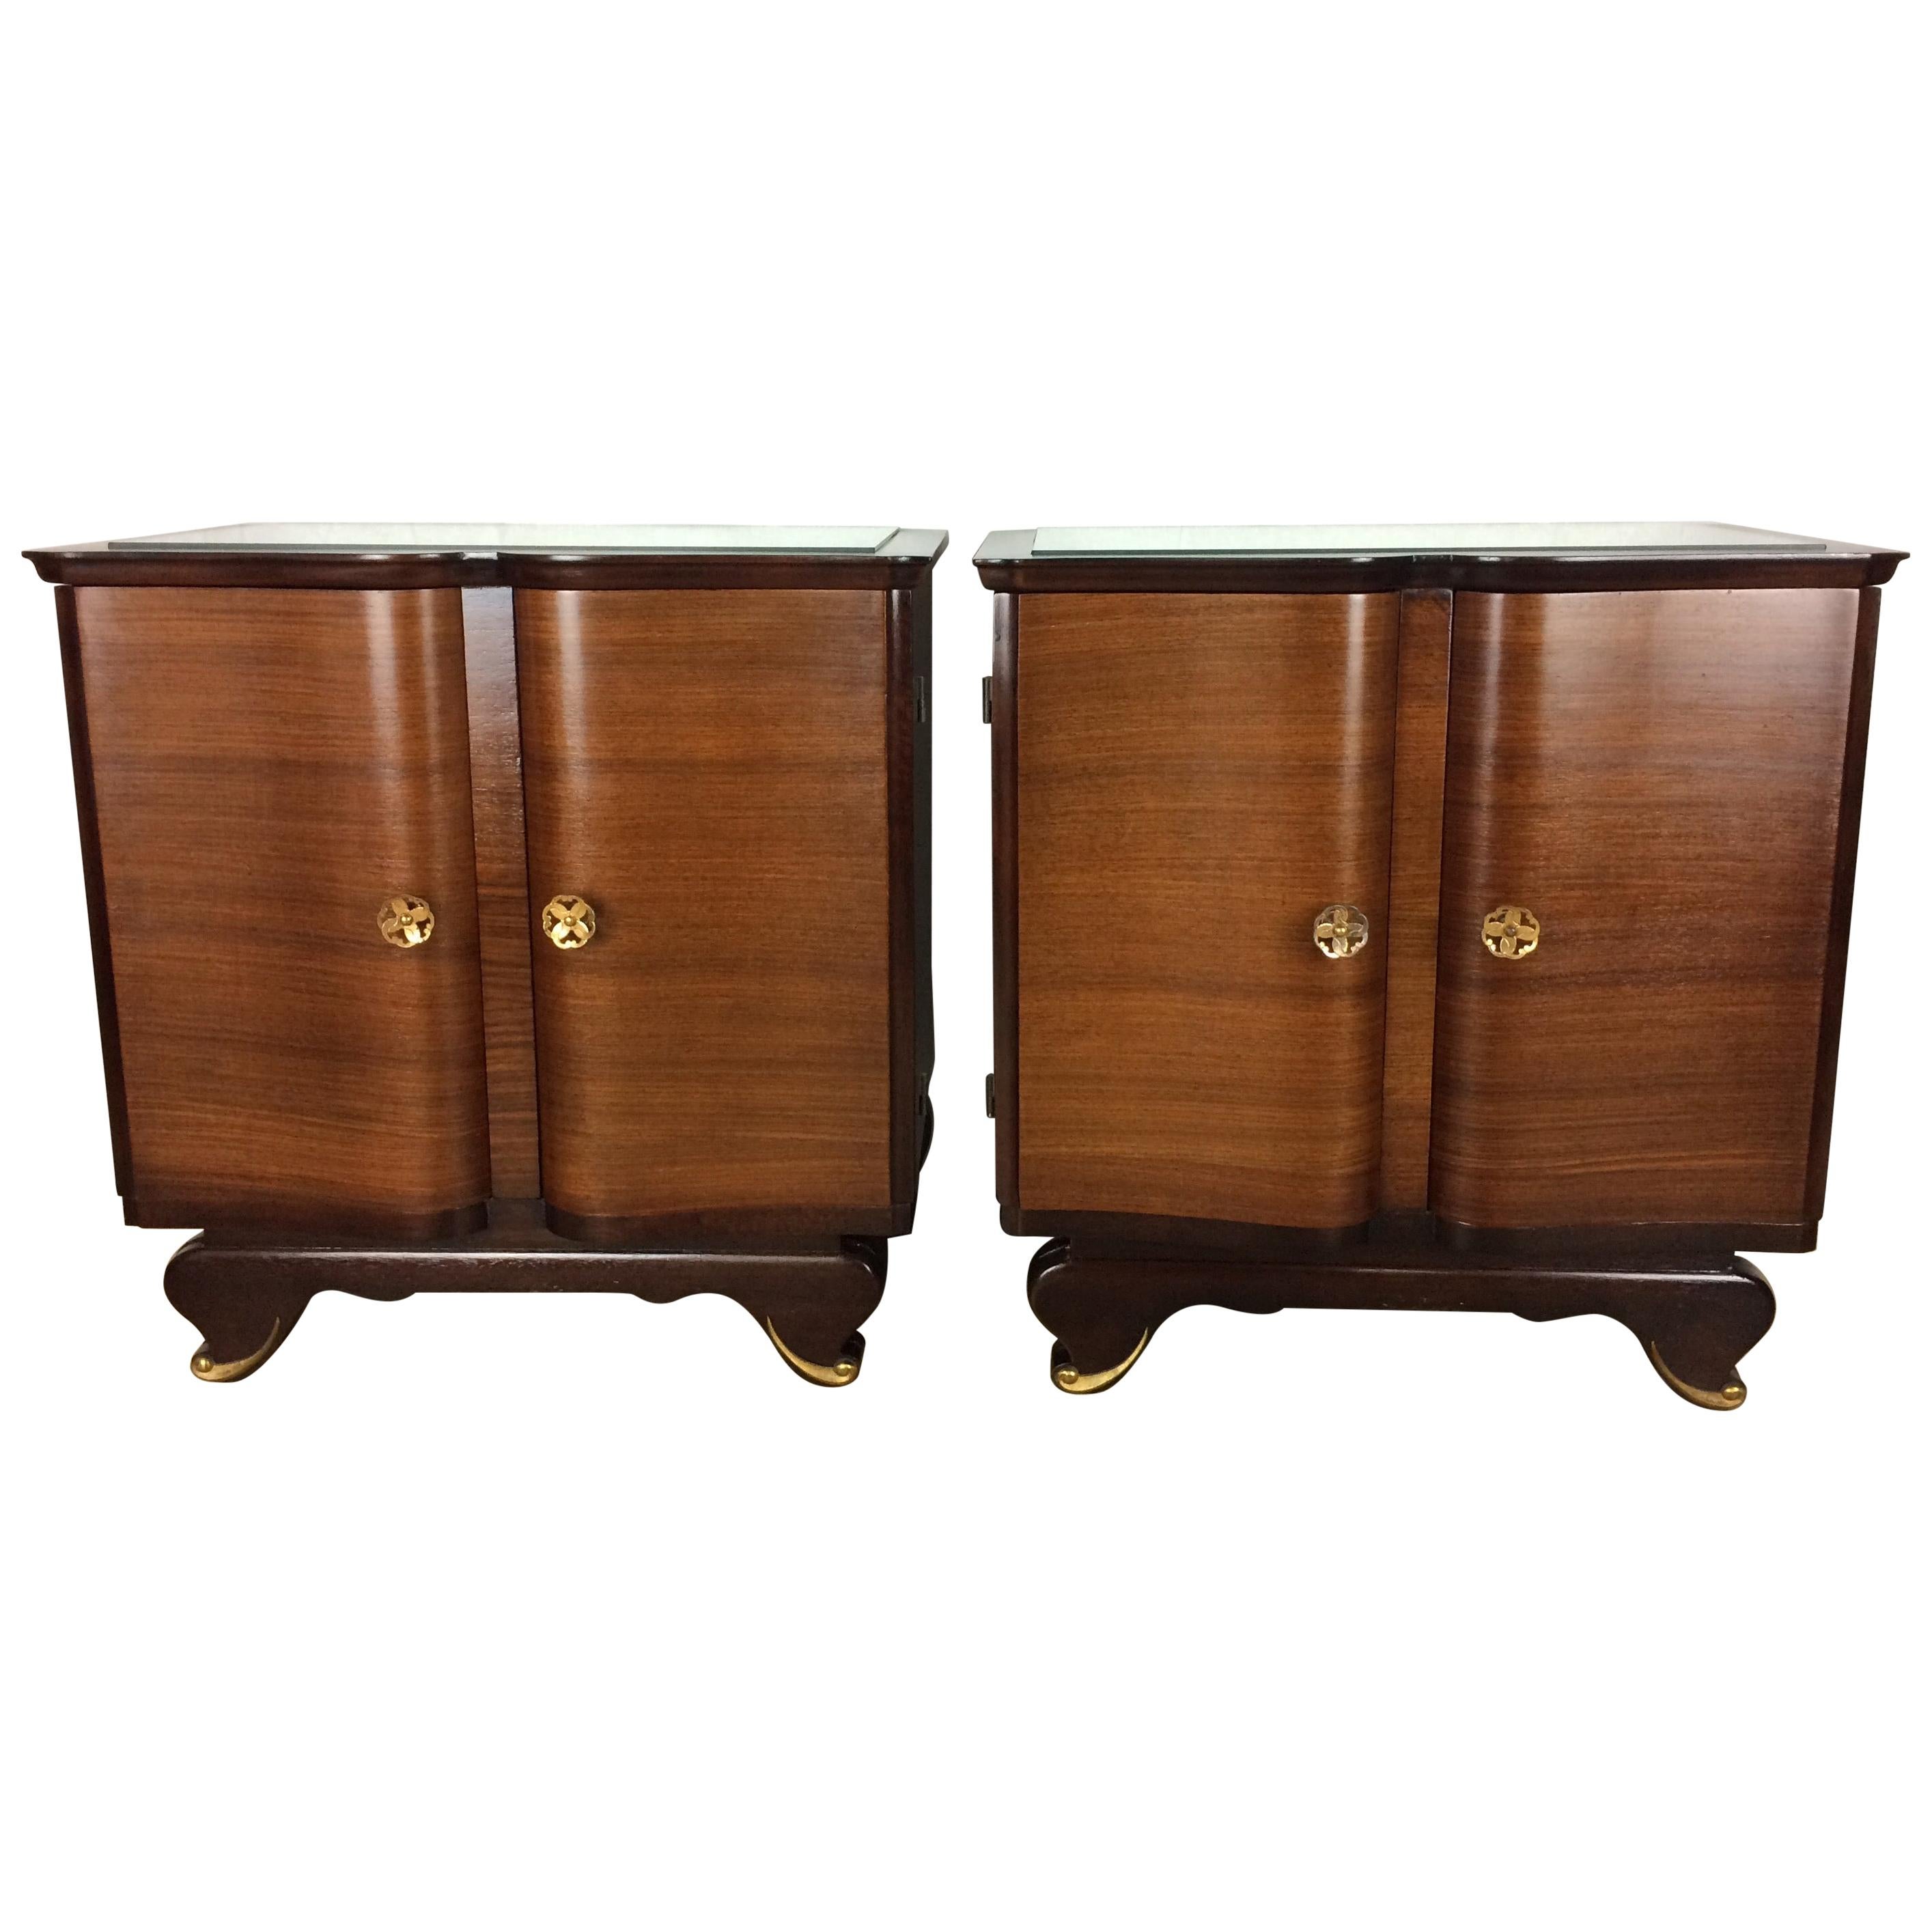 Elegant Pair of French Art Deco Nightstands or Side Tables